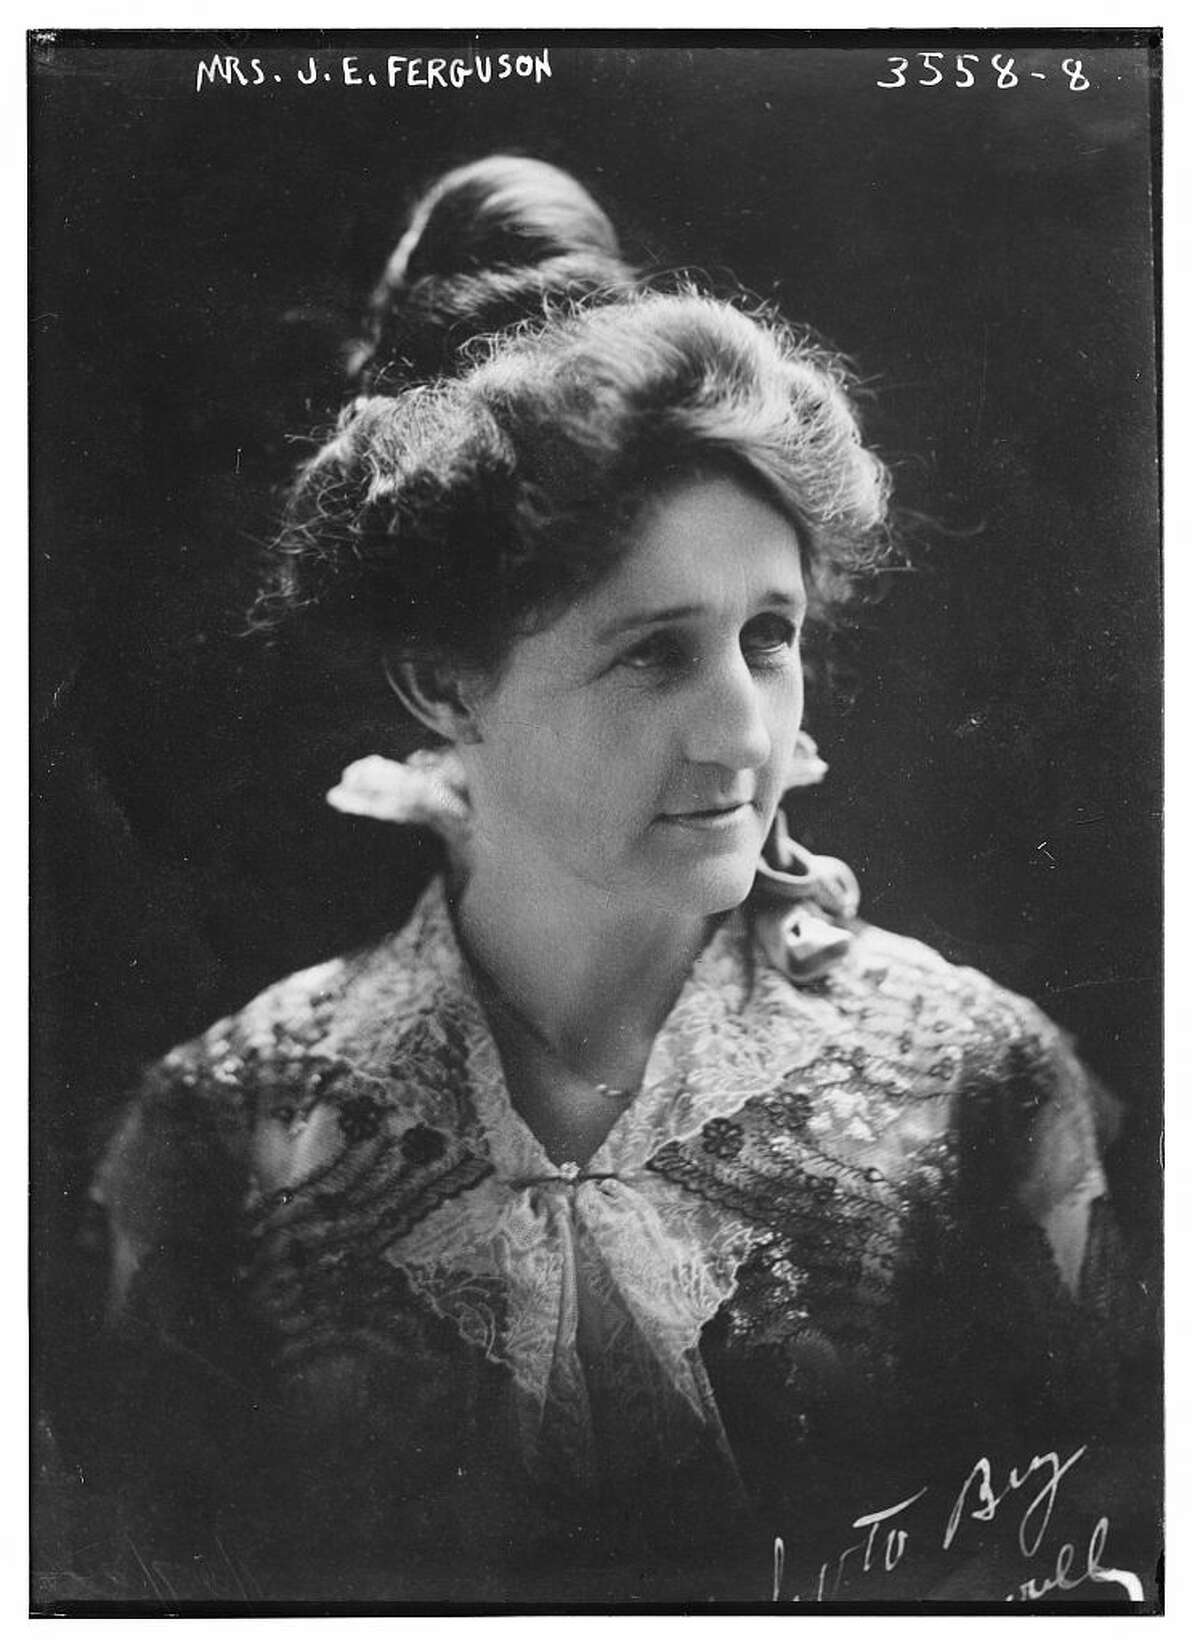 Miriam Amanda Wallace Ferguson (1875 - 1961), American politician. This image was taken of Miriam Amanda Wallace Ferguson when she was First Lady of Texas, prior to her being elected Governor in her own right. Click forward to see more badass women of Texas.